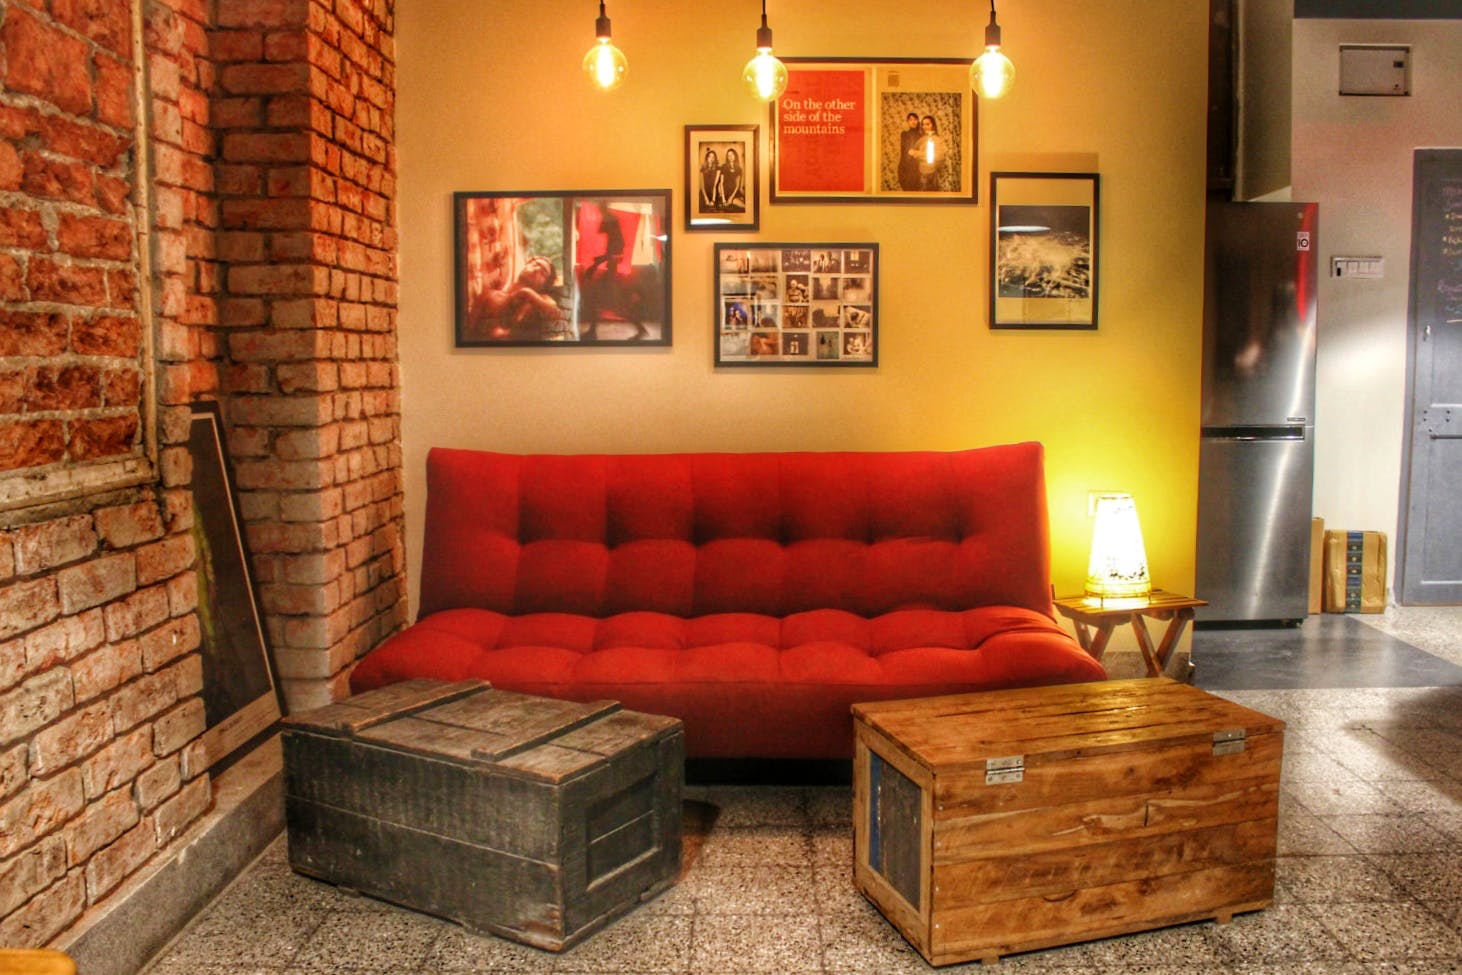 Furniture,Couch,Room,Living room,Red,Interior design,Property,Wall,Orange,Lighting